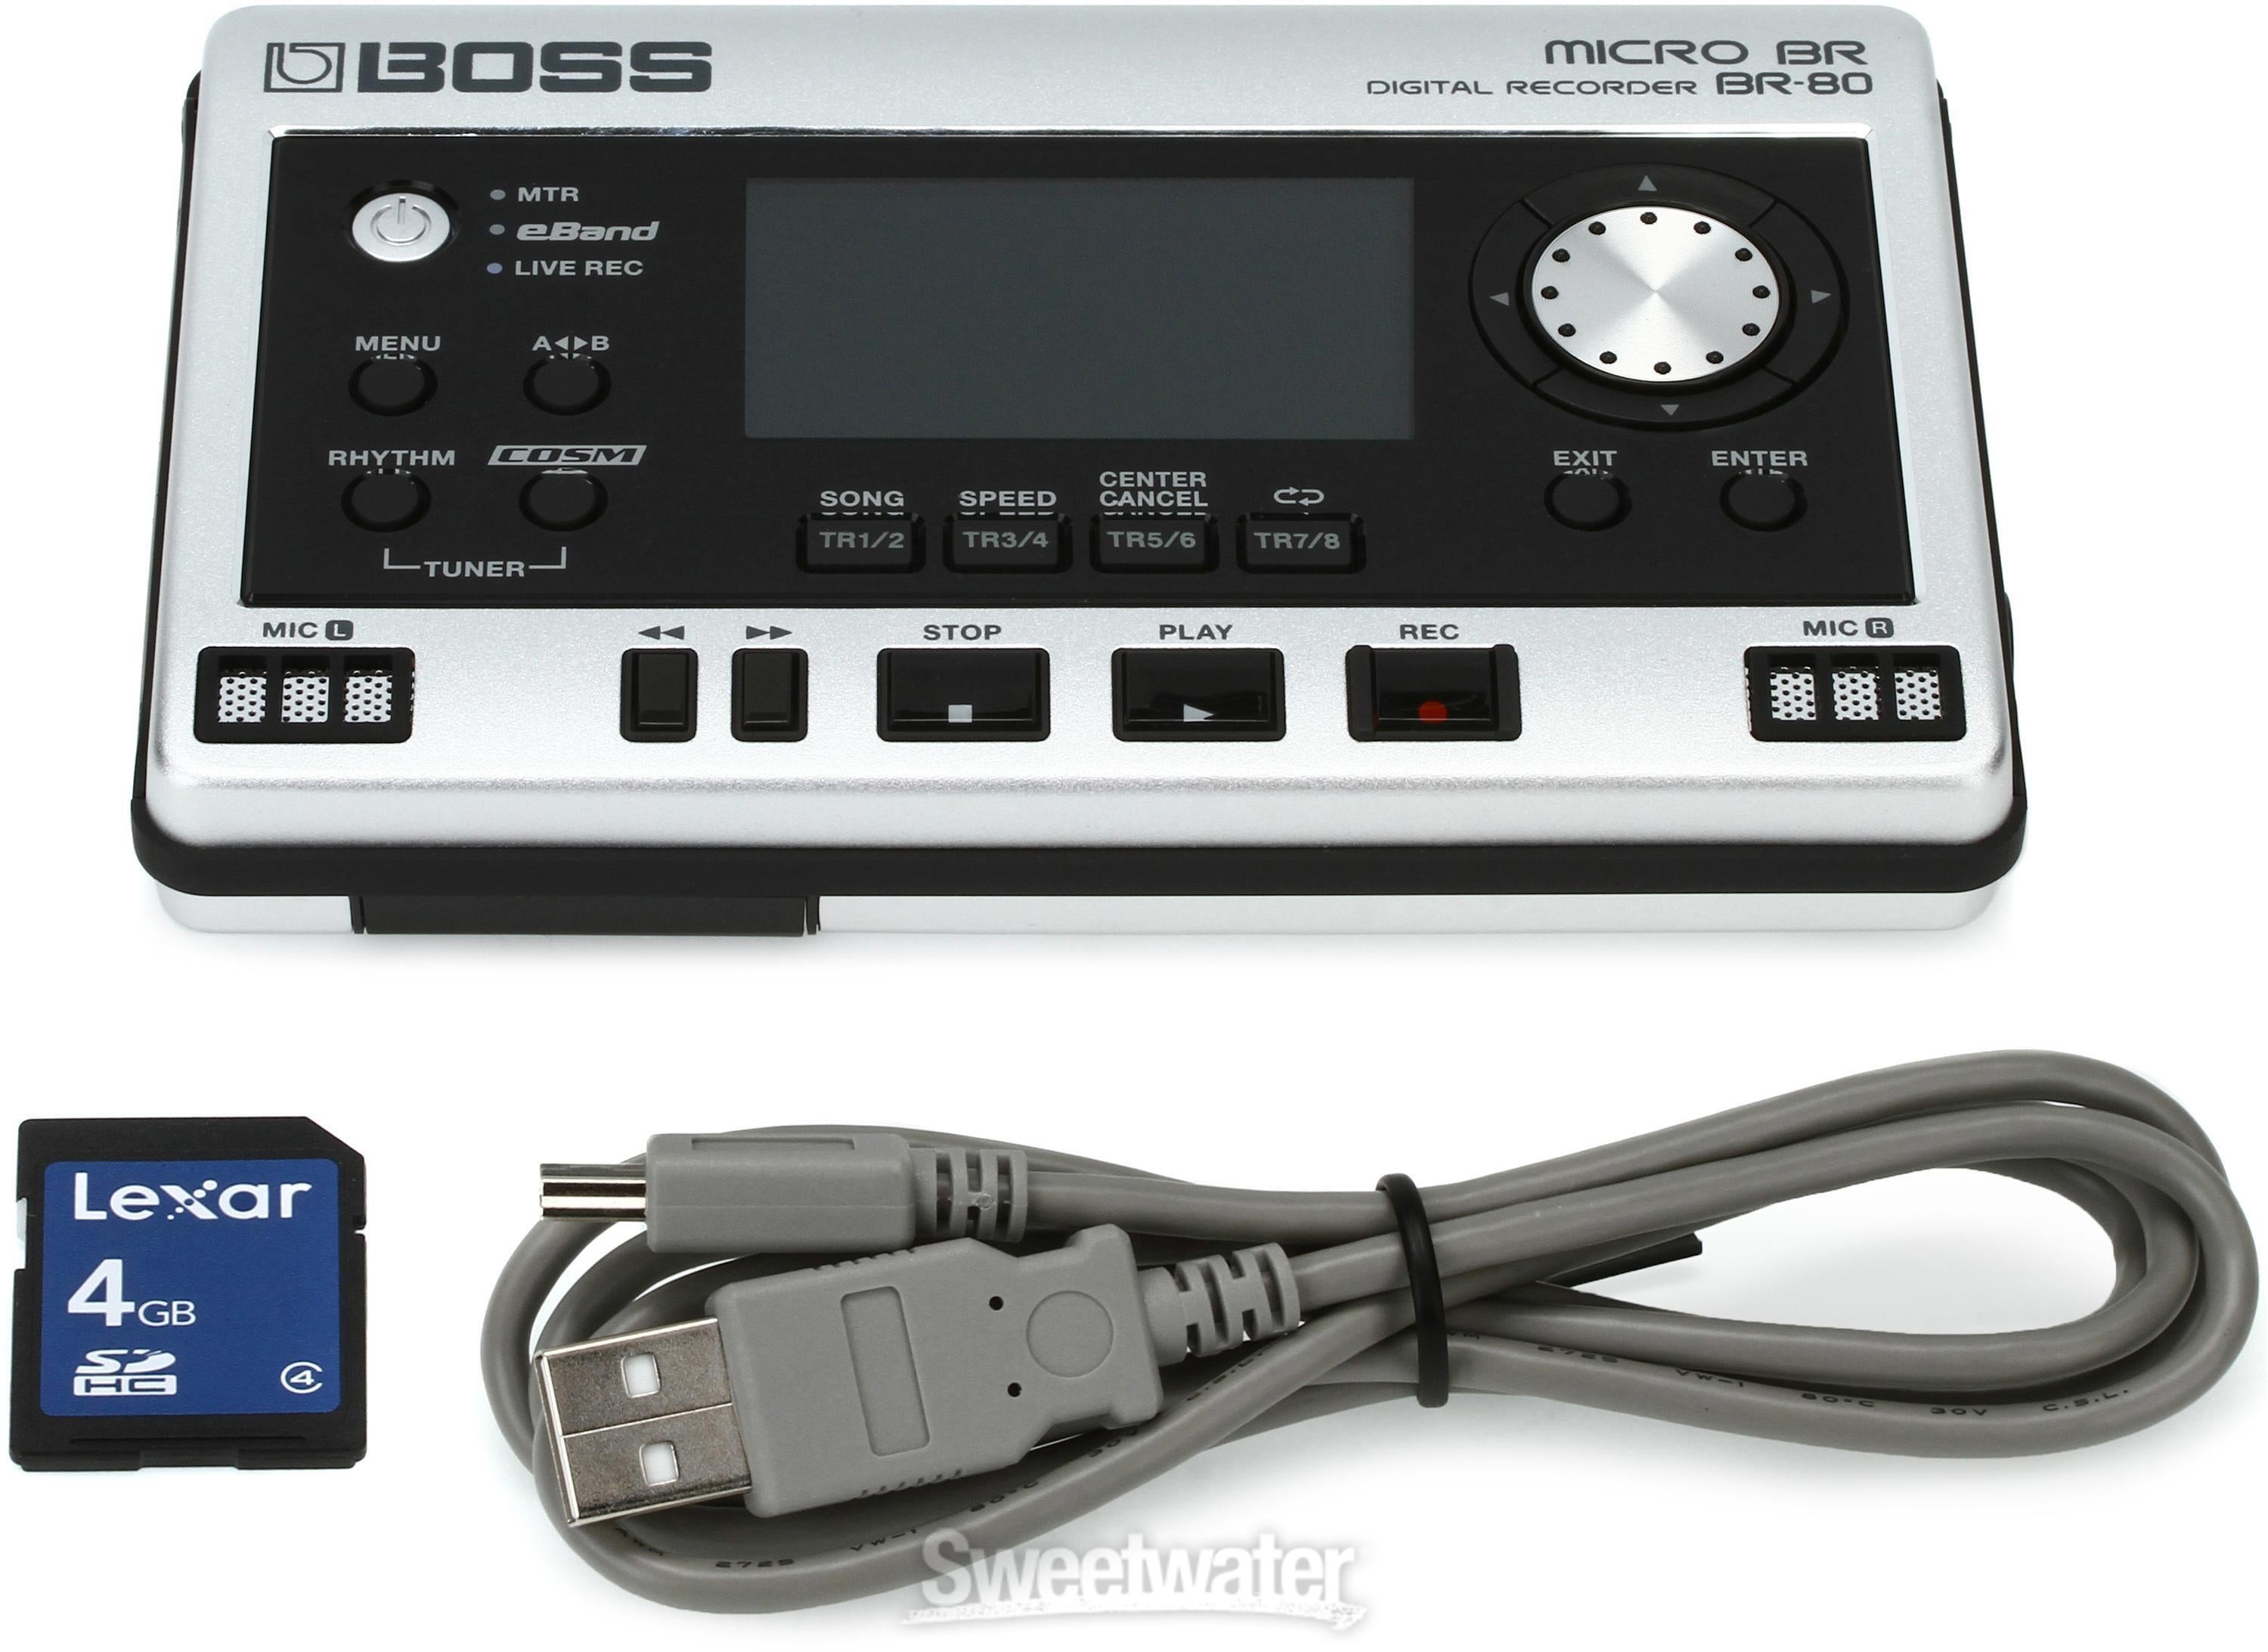 Boss MICRO BR BR-80 8-channel Digital Recorder Reviews | Sweetwater